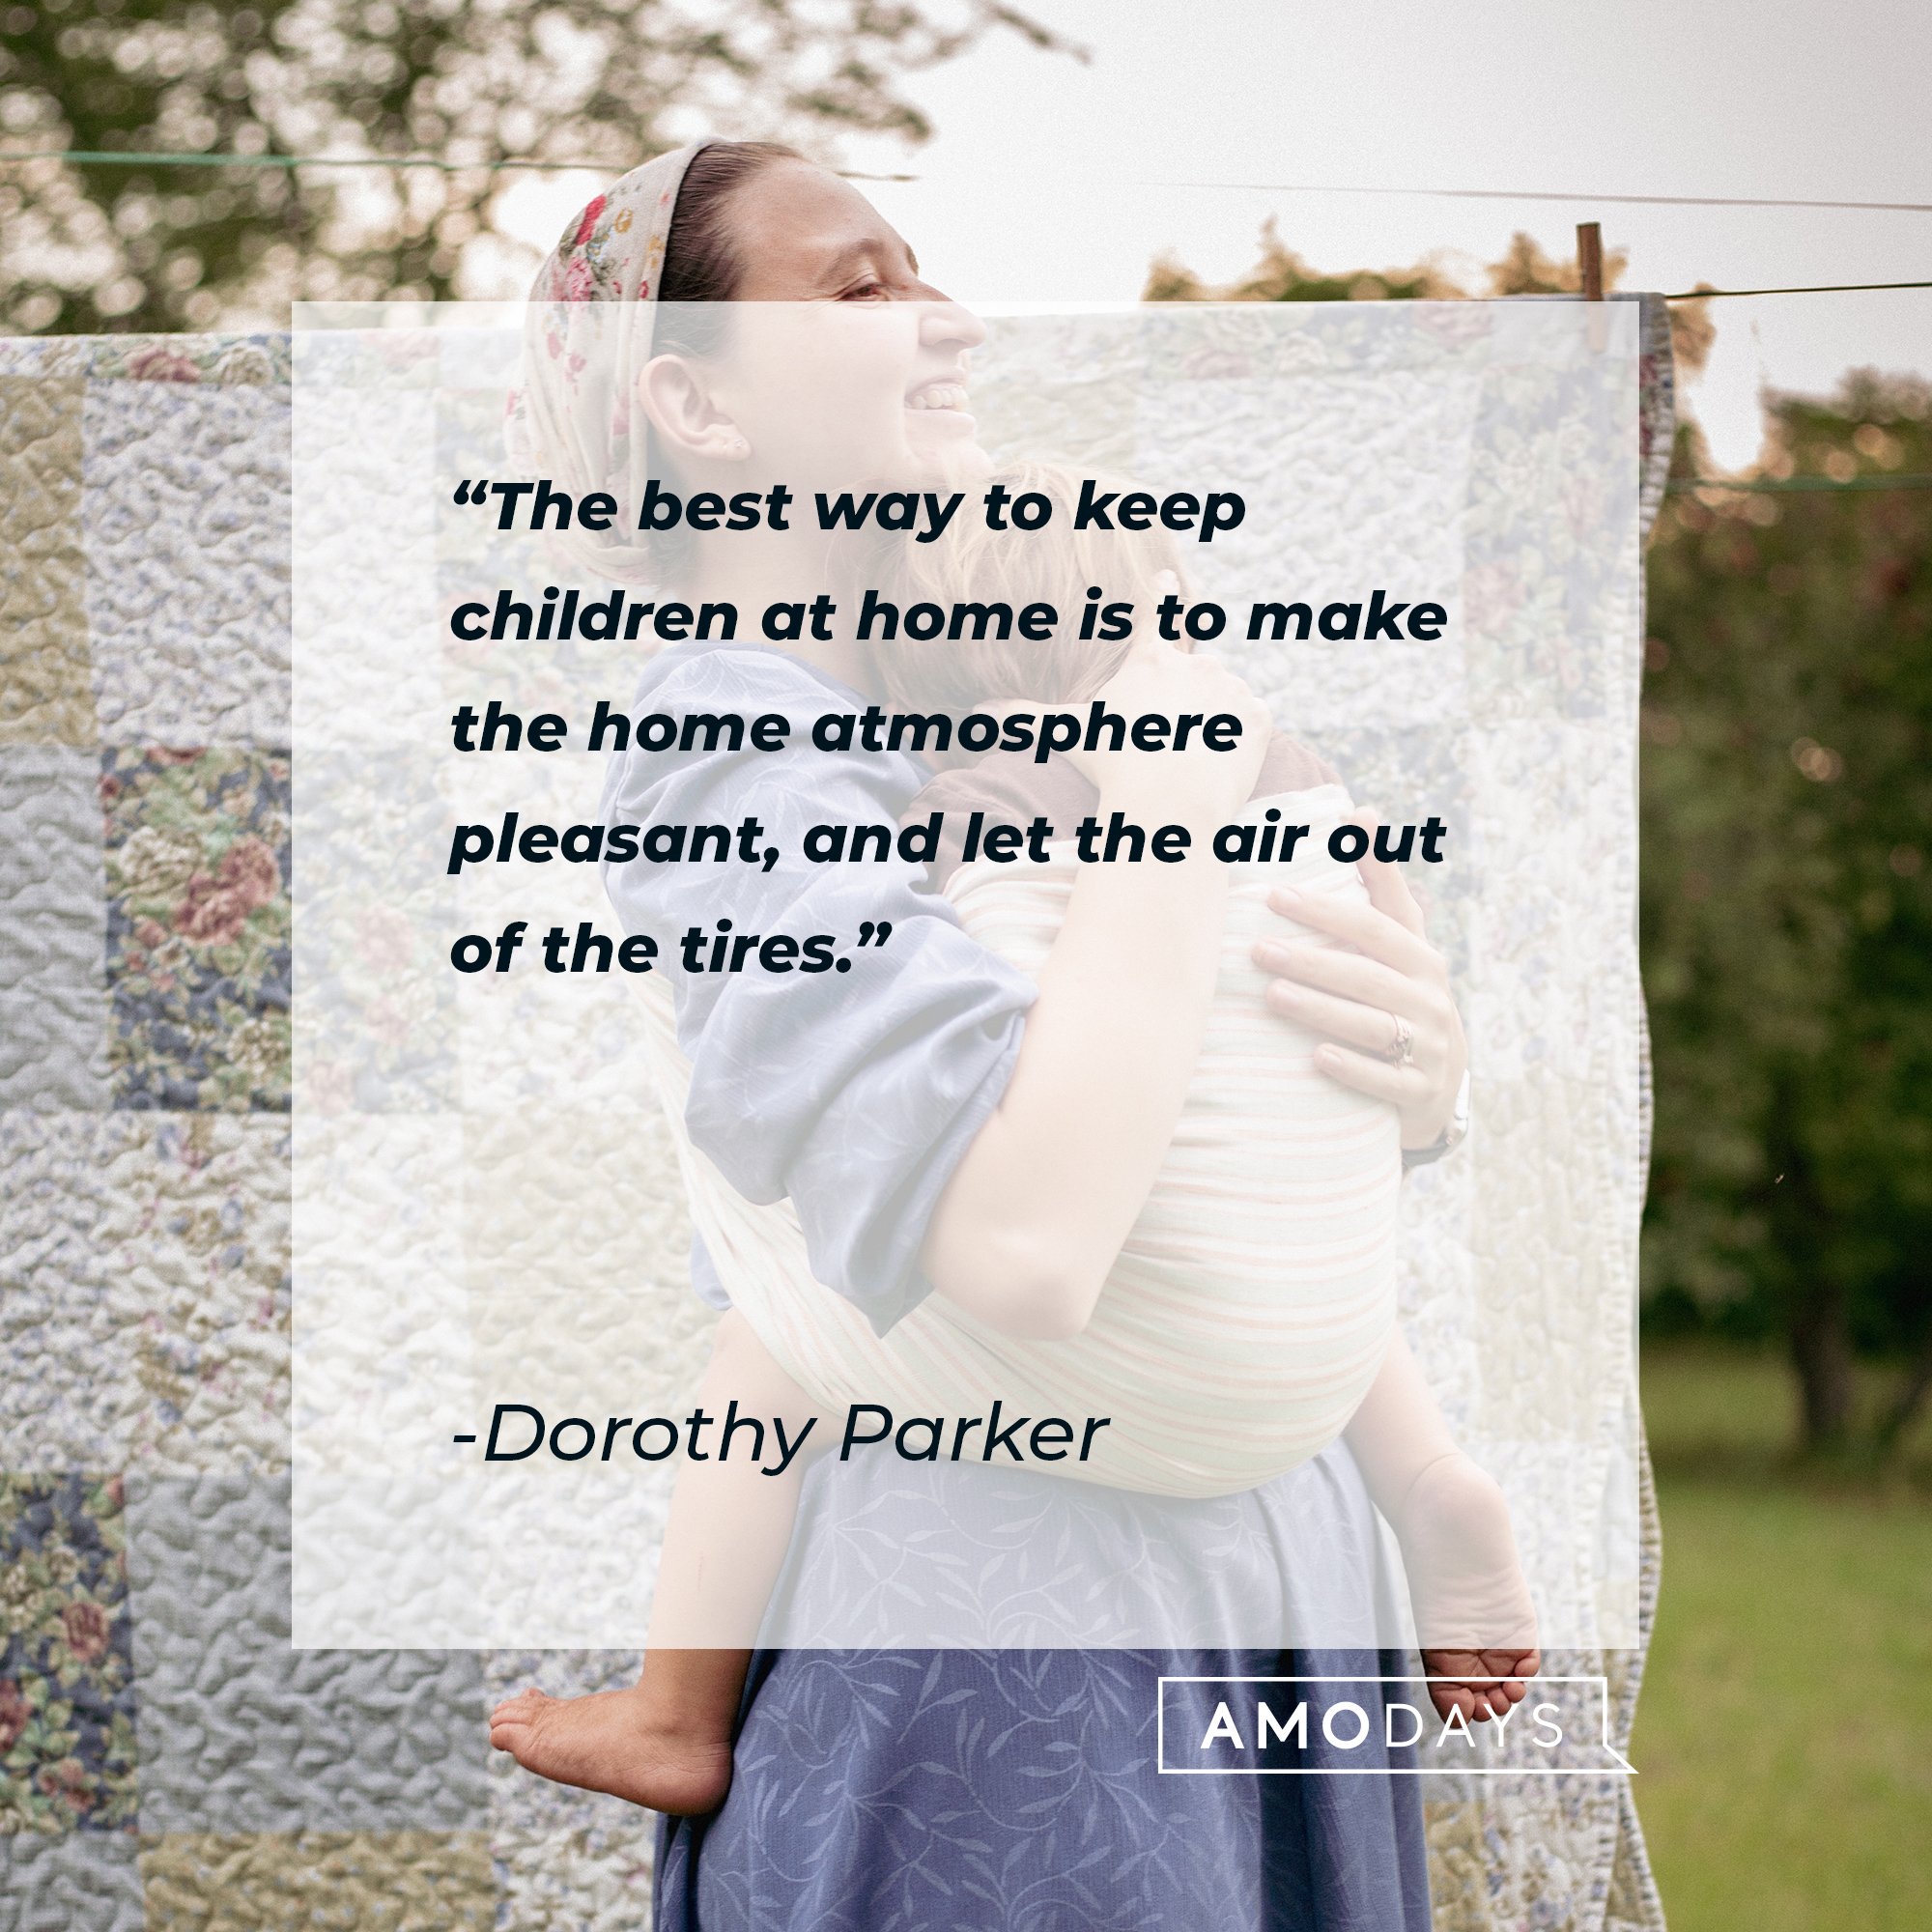 Dorothy Parker's quote: "The best way to keep children at home is to make the home atmosphere pleasant, and let the air out of the tires." | Image: AmoDays